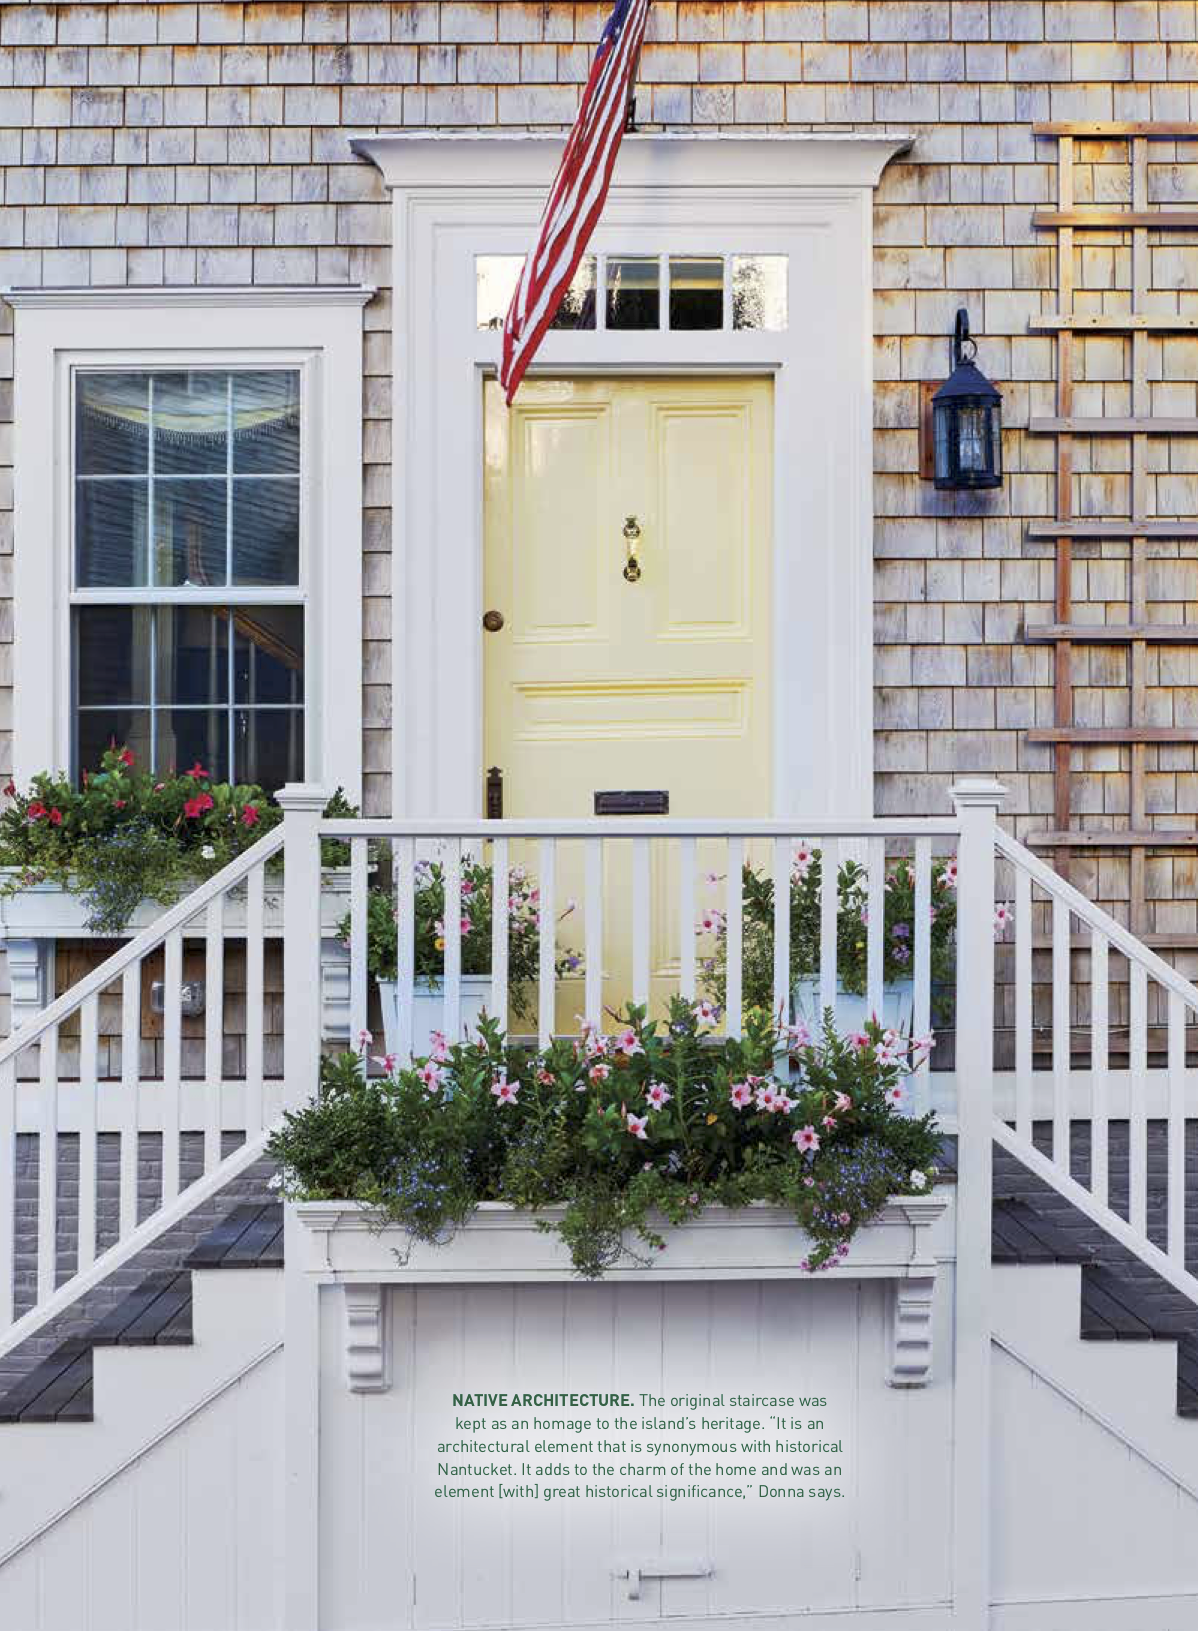 Cottages and Bungalows: Fair Street Nantucket June/July 2020